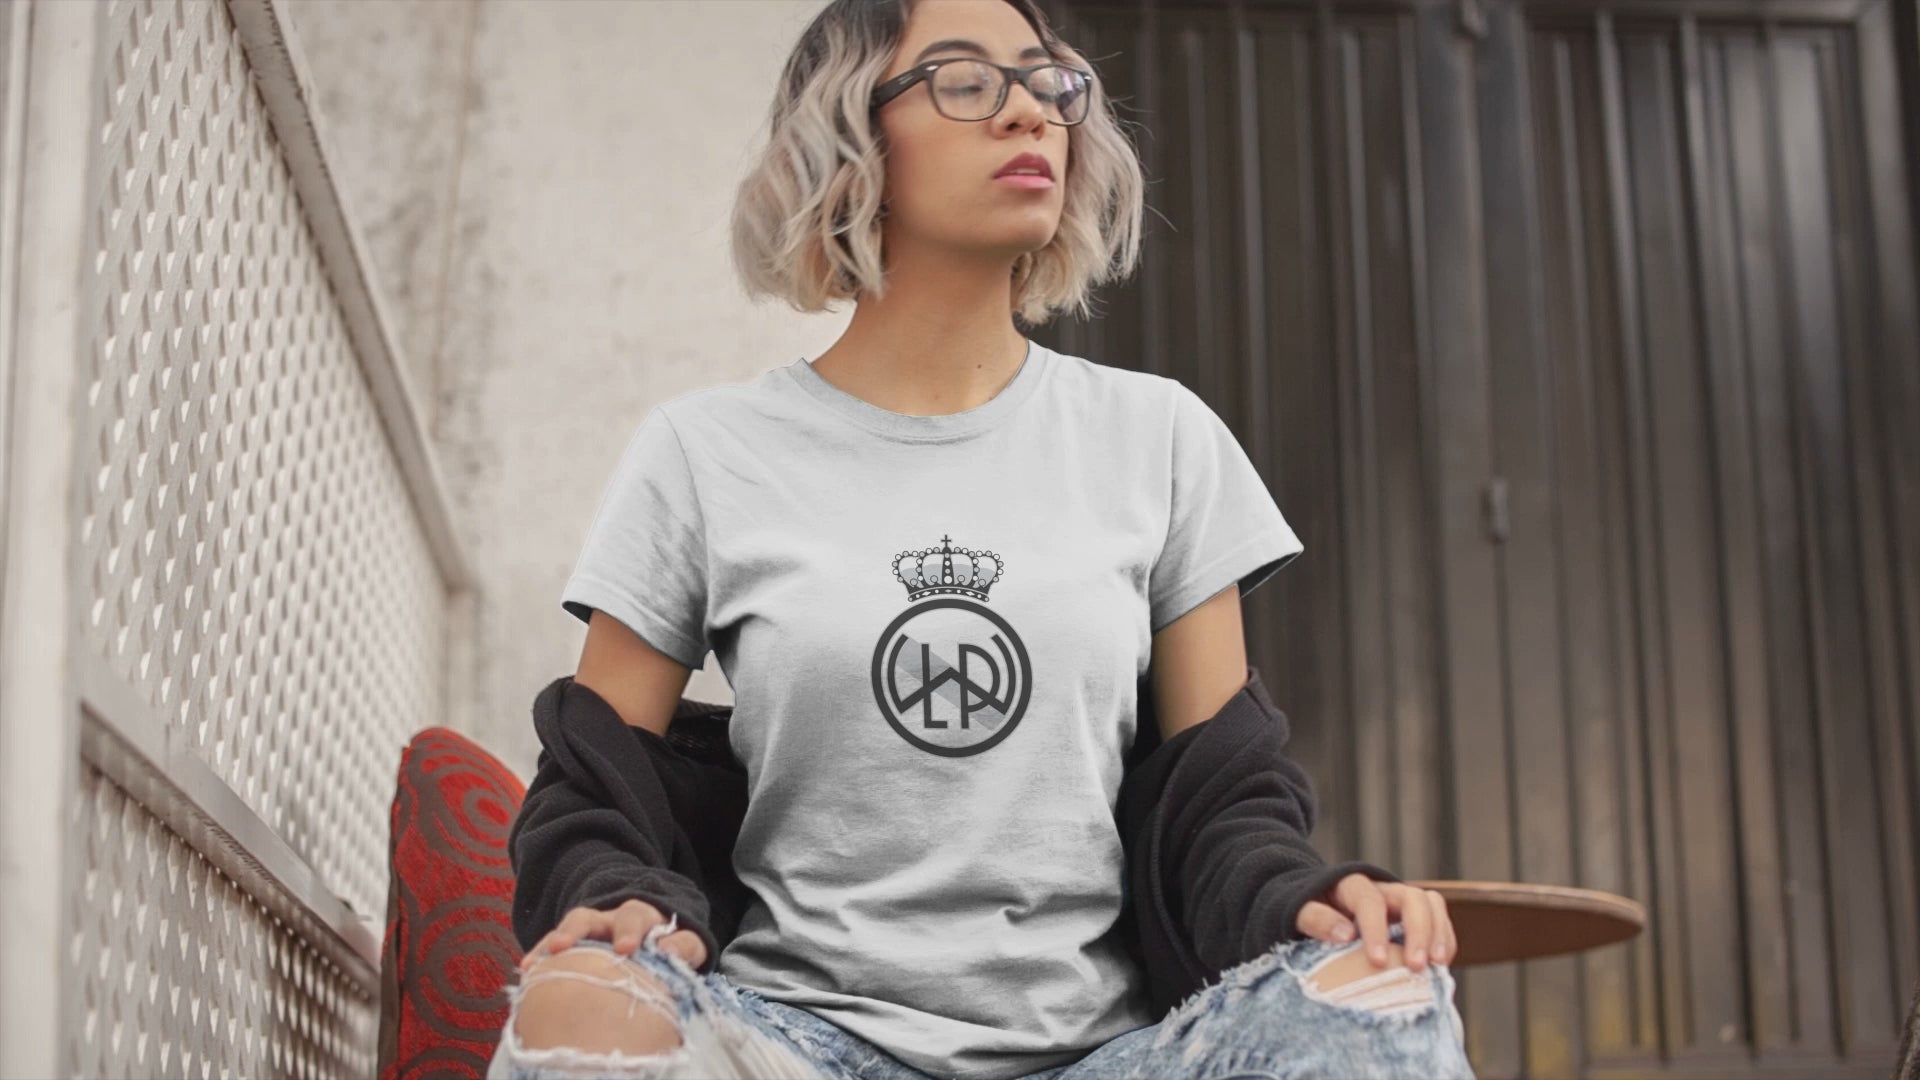 Load video: A t-shirt video featuring an edgy woman with blue framed glasses and short colored hair wearing an LWPFC dark gray short sleeved t-shirt with the club logo in black and white.